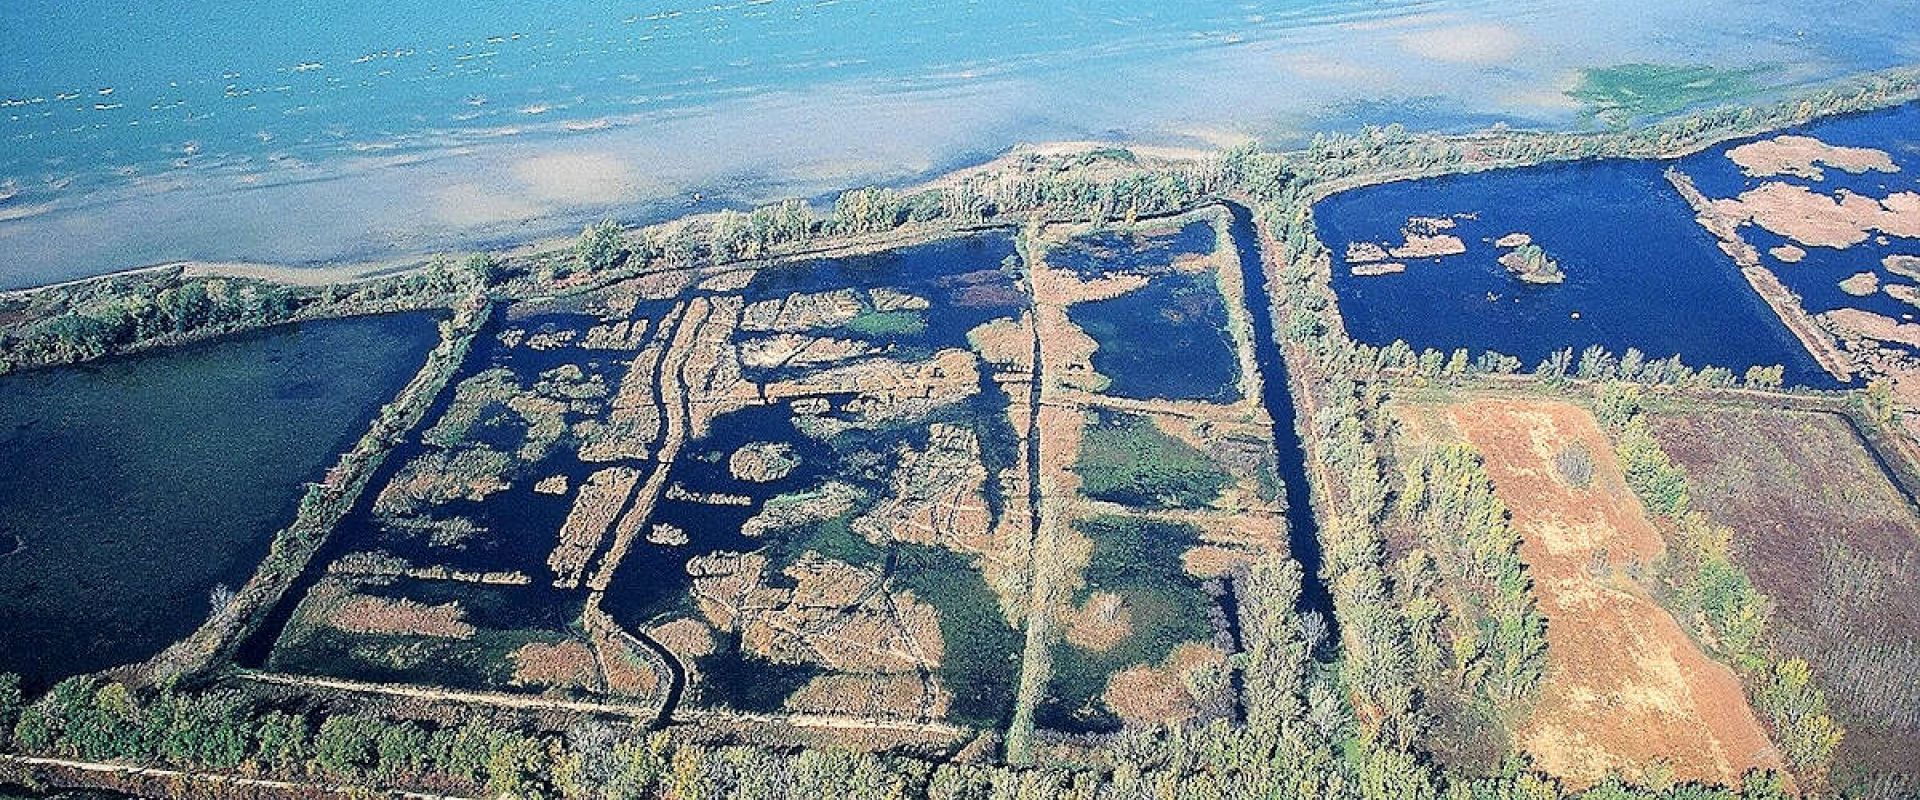 An aerial photograph showing several acres of the St. Clair Marshes, located beside Lake St. Clair.